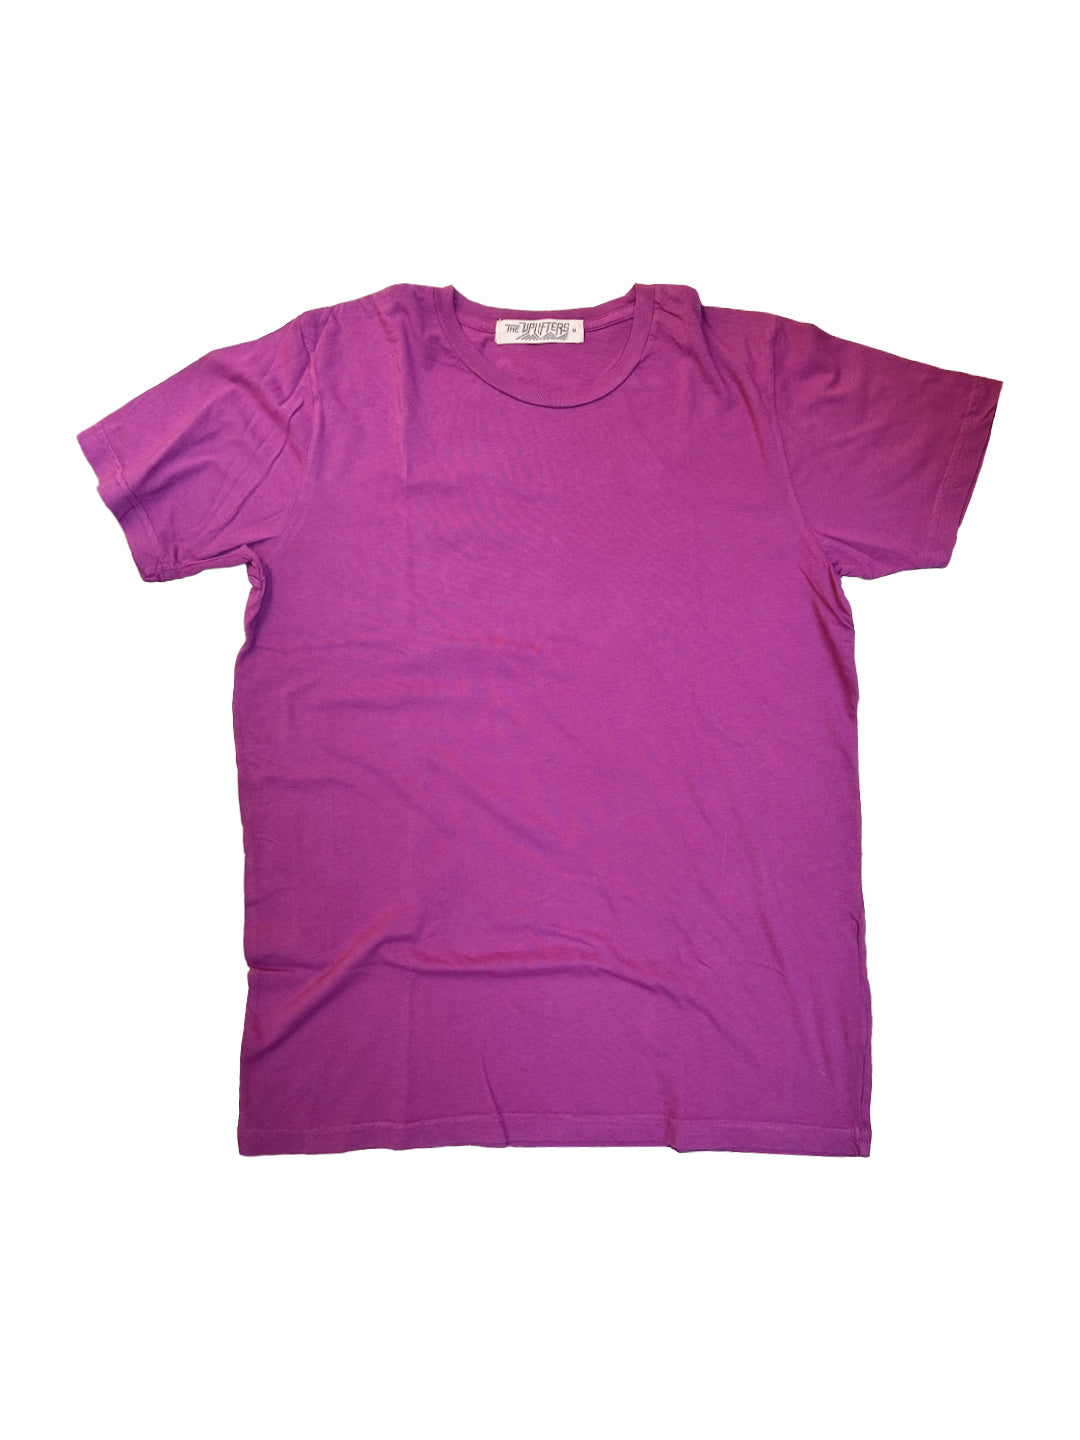 Canyon School Is Cool Adult Tee in Grape